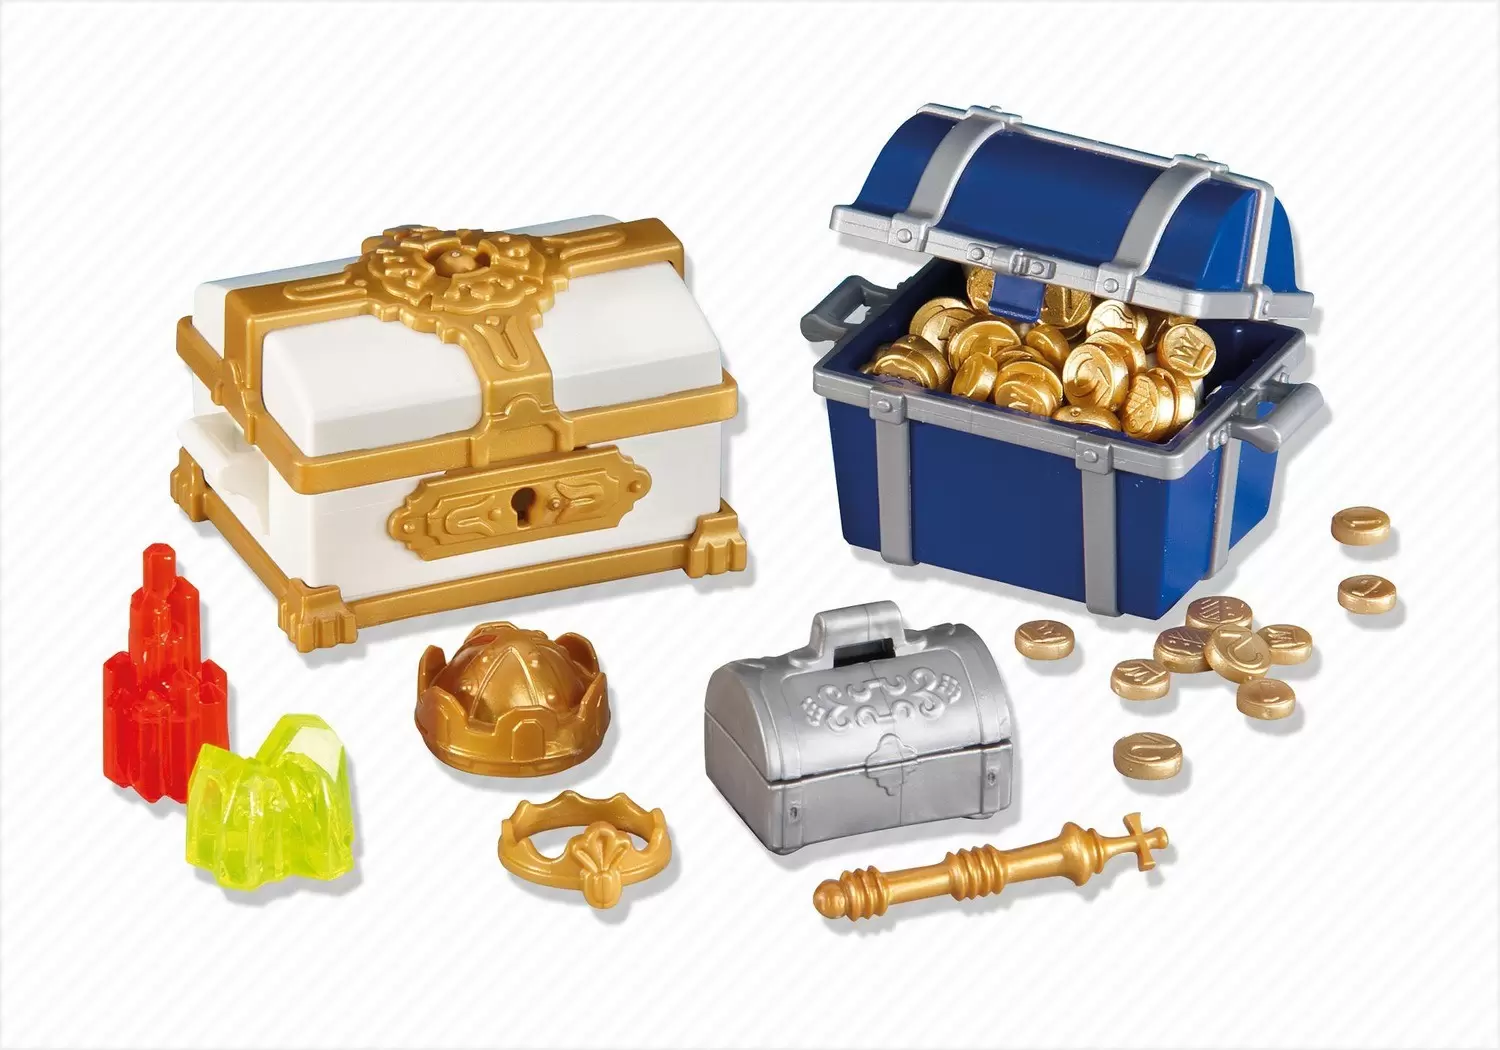 Playmobil Accessories & decorations - treasure chests with jewels